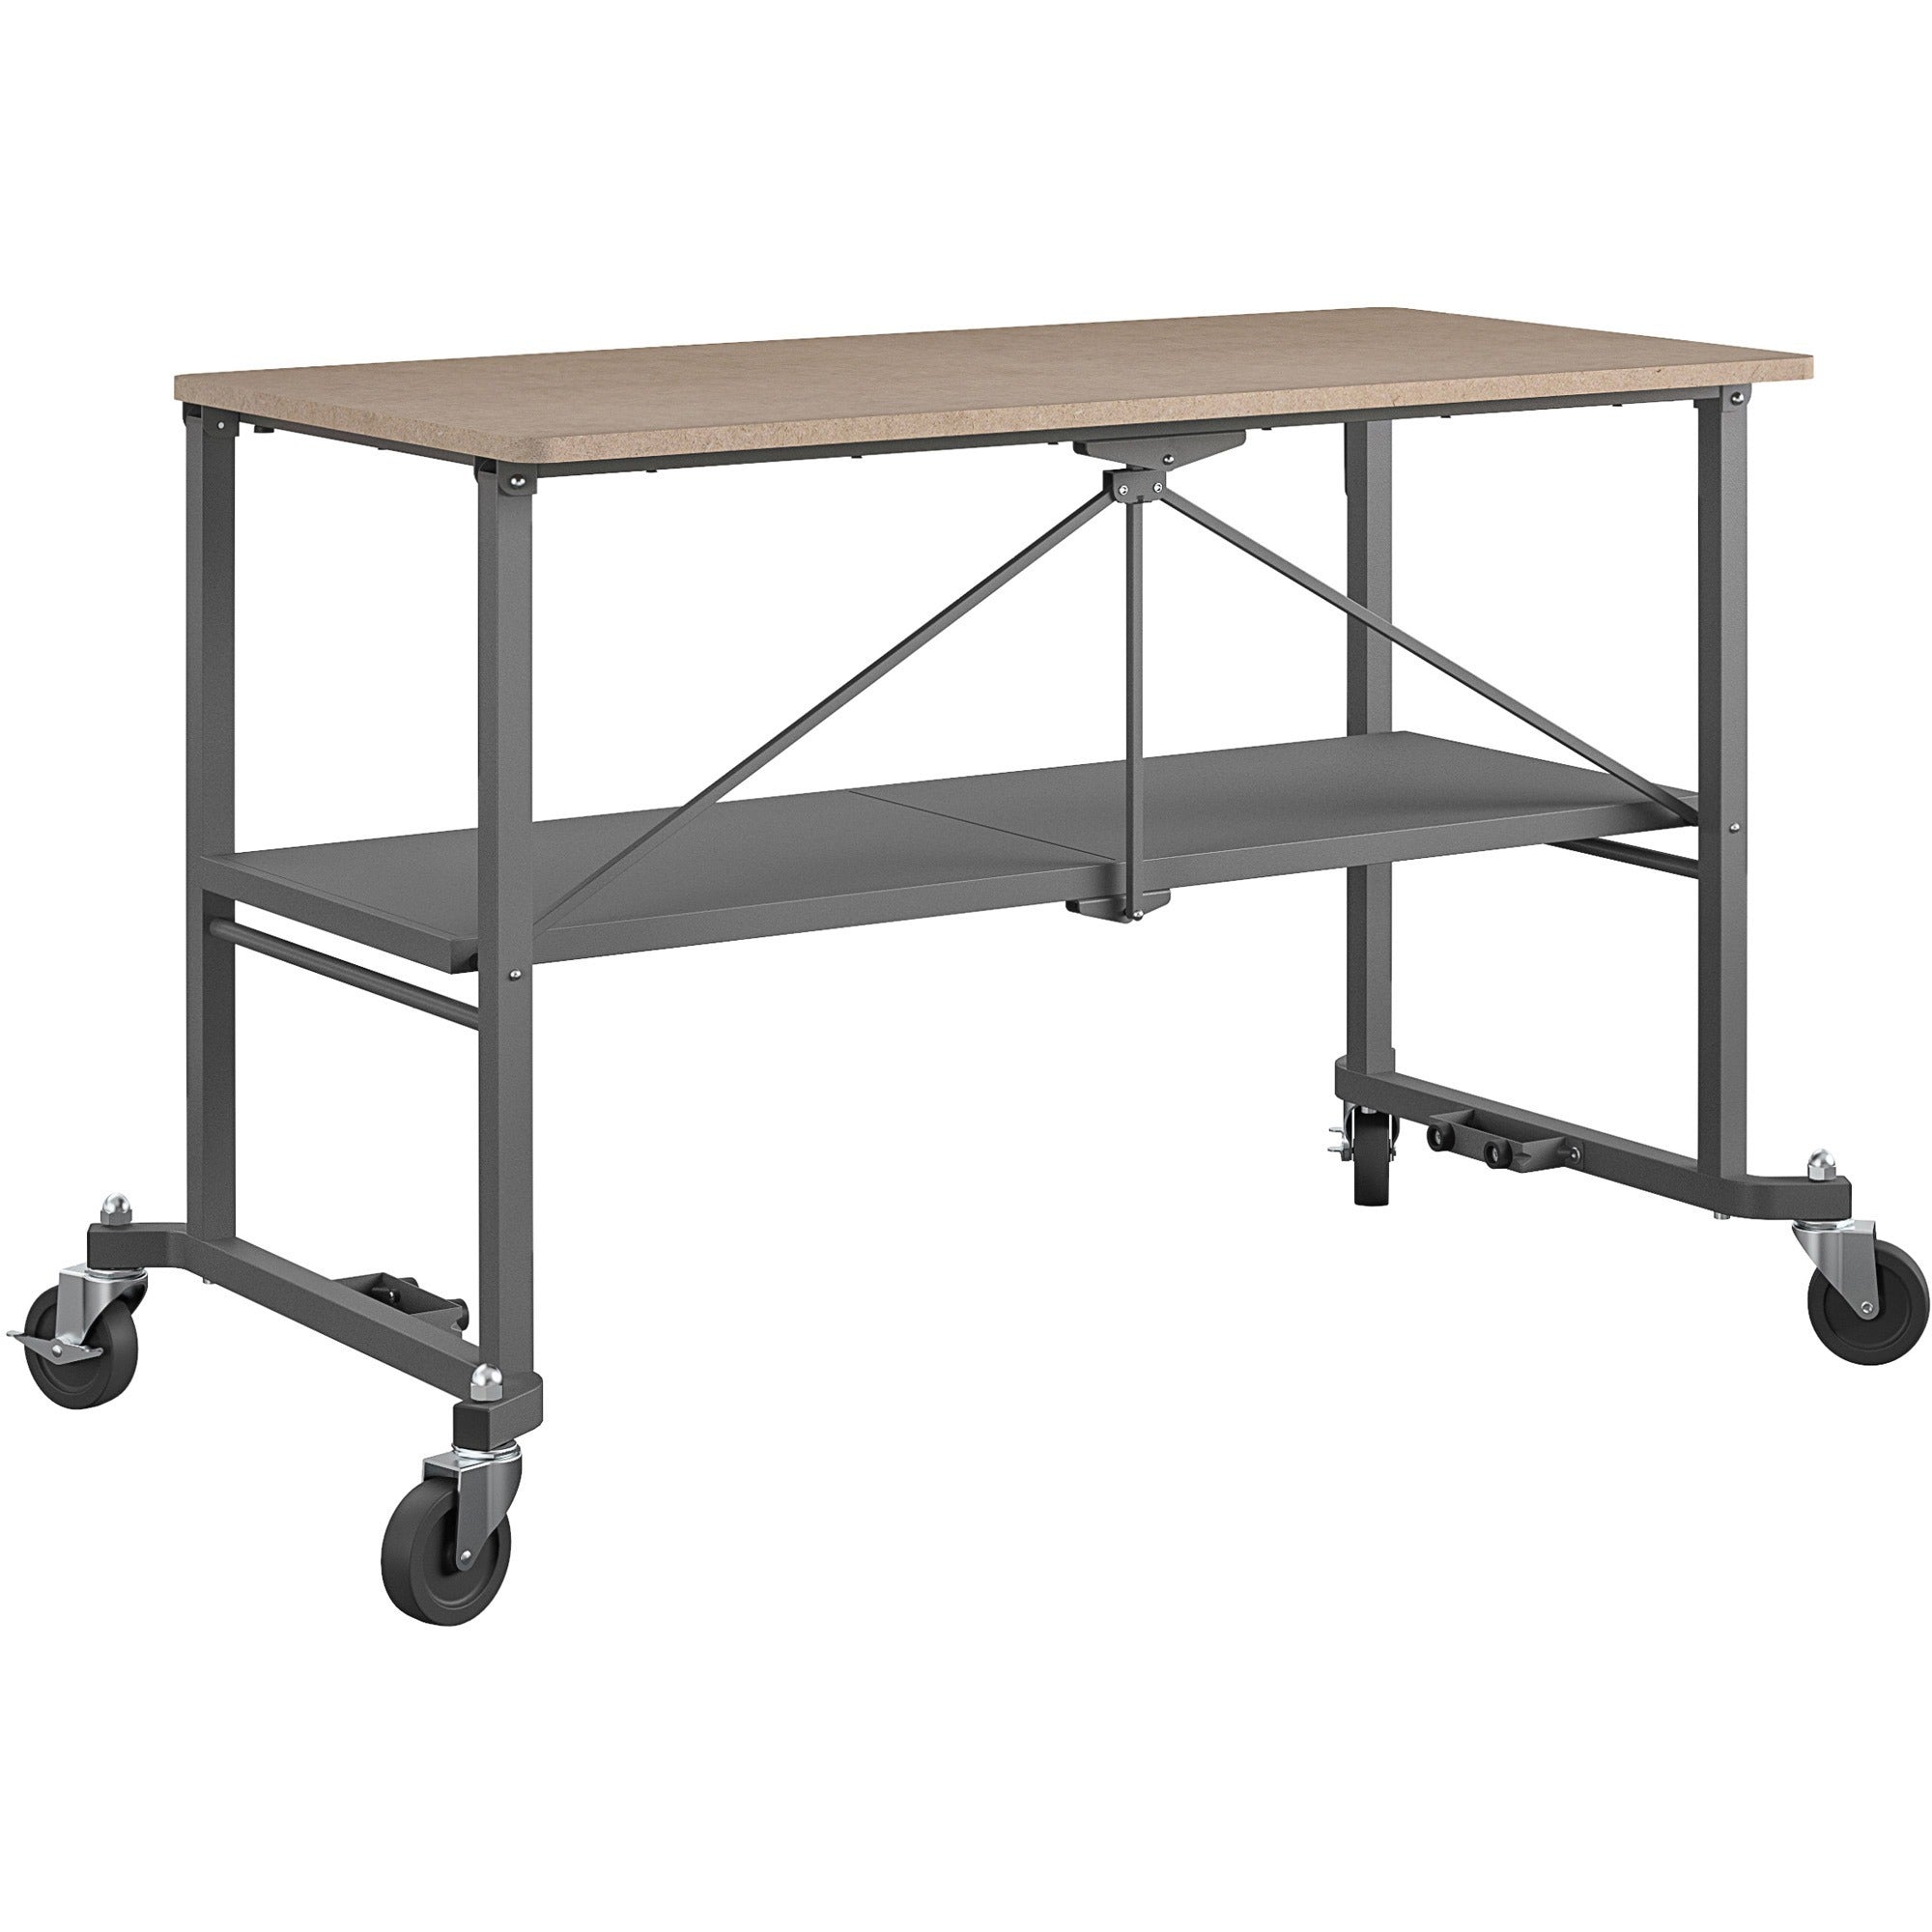 Cosco Smartfold Portable Work Desk Table - For - Table TopRectangle Top - Four Leg Base - 4 Legs - 600 lb Capacity x 51.40" Table Top Width x 26.50" Table Top Depth - 34" Height - Gray - Steel - Medium Density Fiberboard (MDF) Top Material - 1 Each - 1